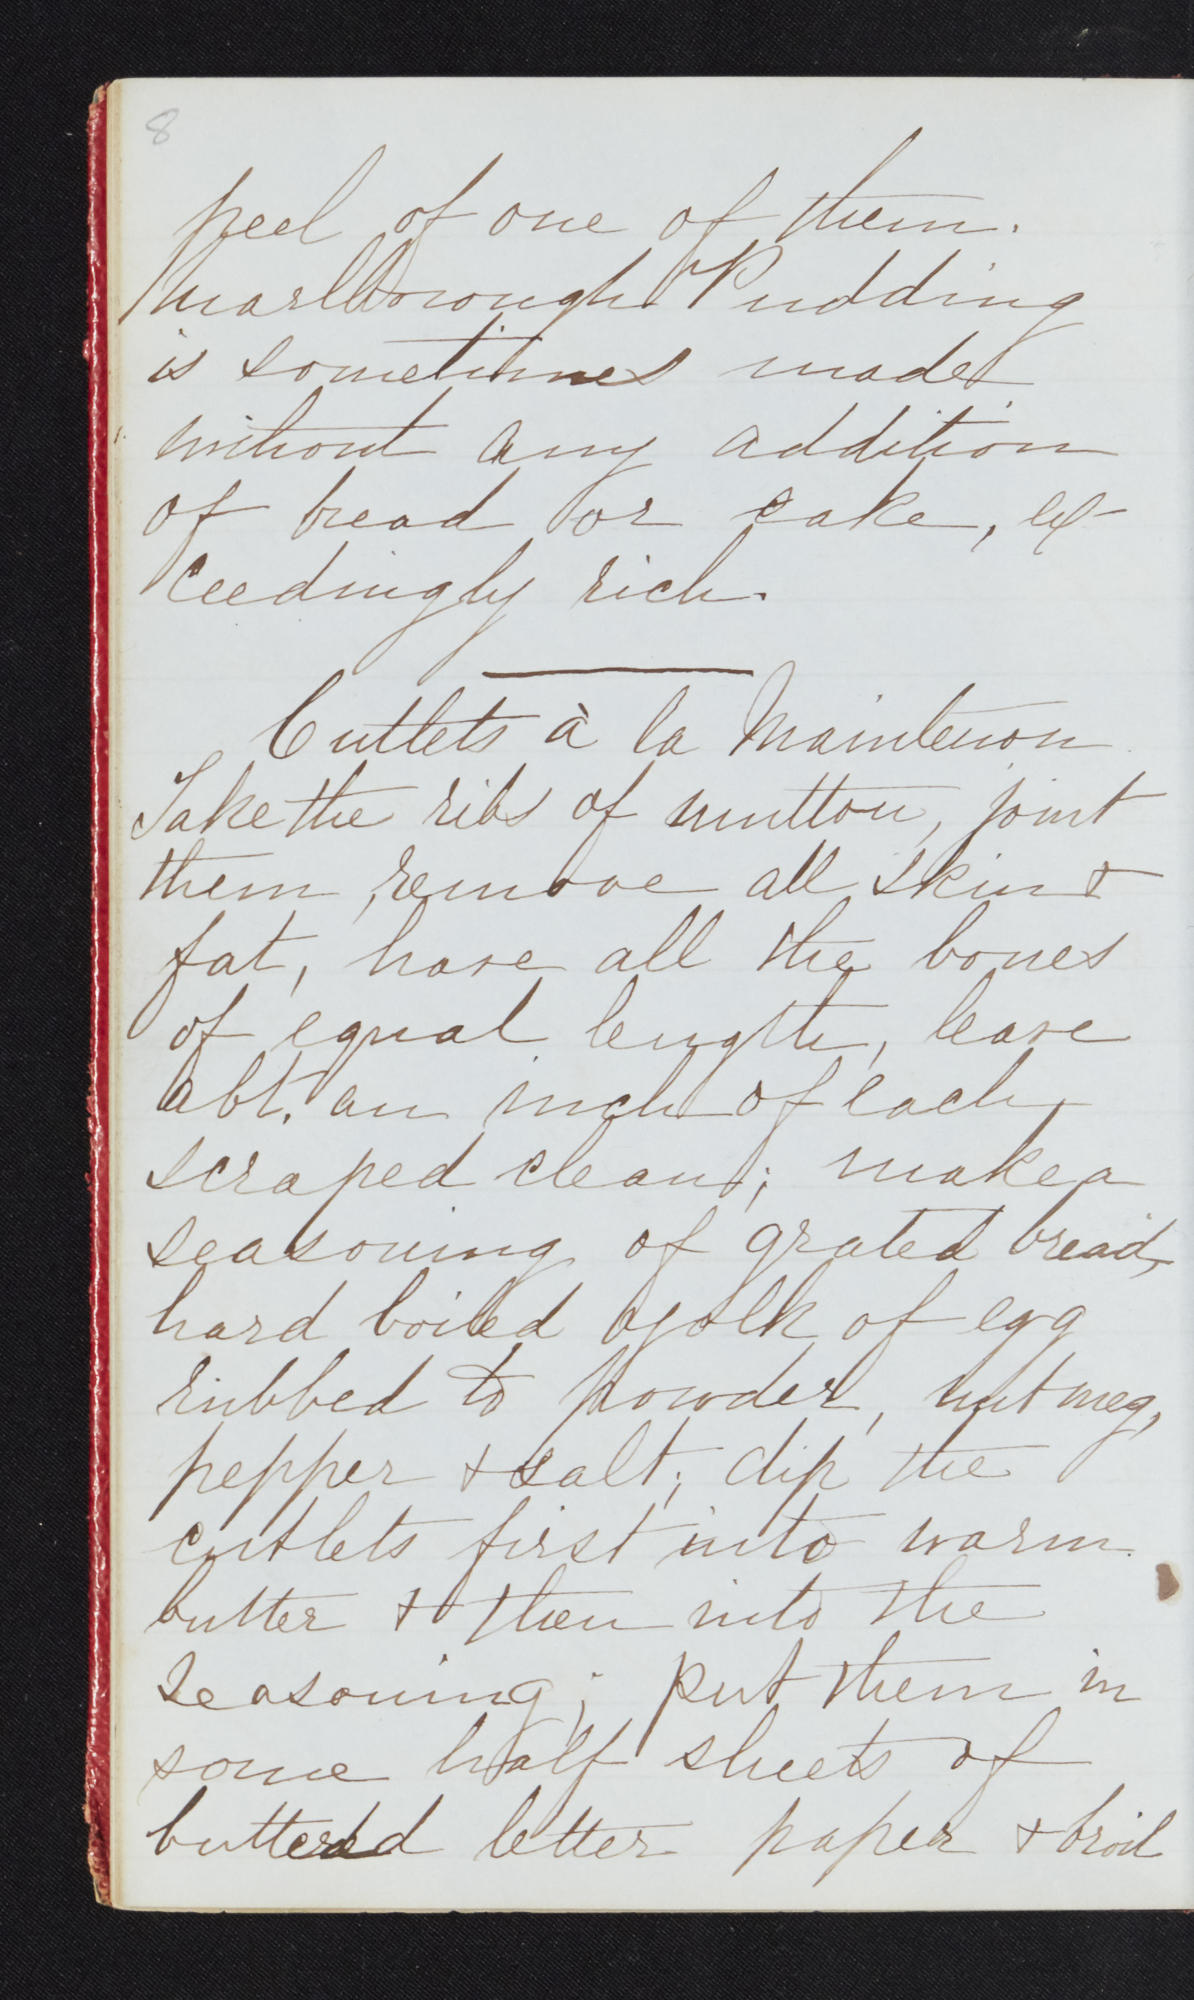 Recipe for “Cutlets à la Maintenon” from Isabella’s recipe book in the handwriting of Adelia Stewart, Isabella’s mother